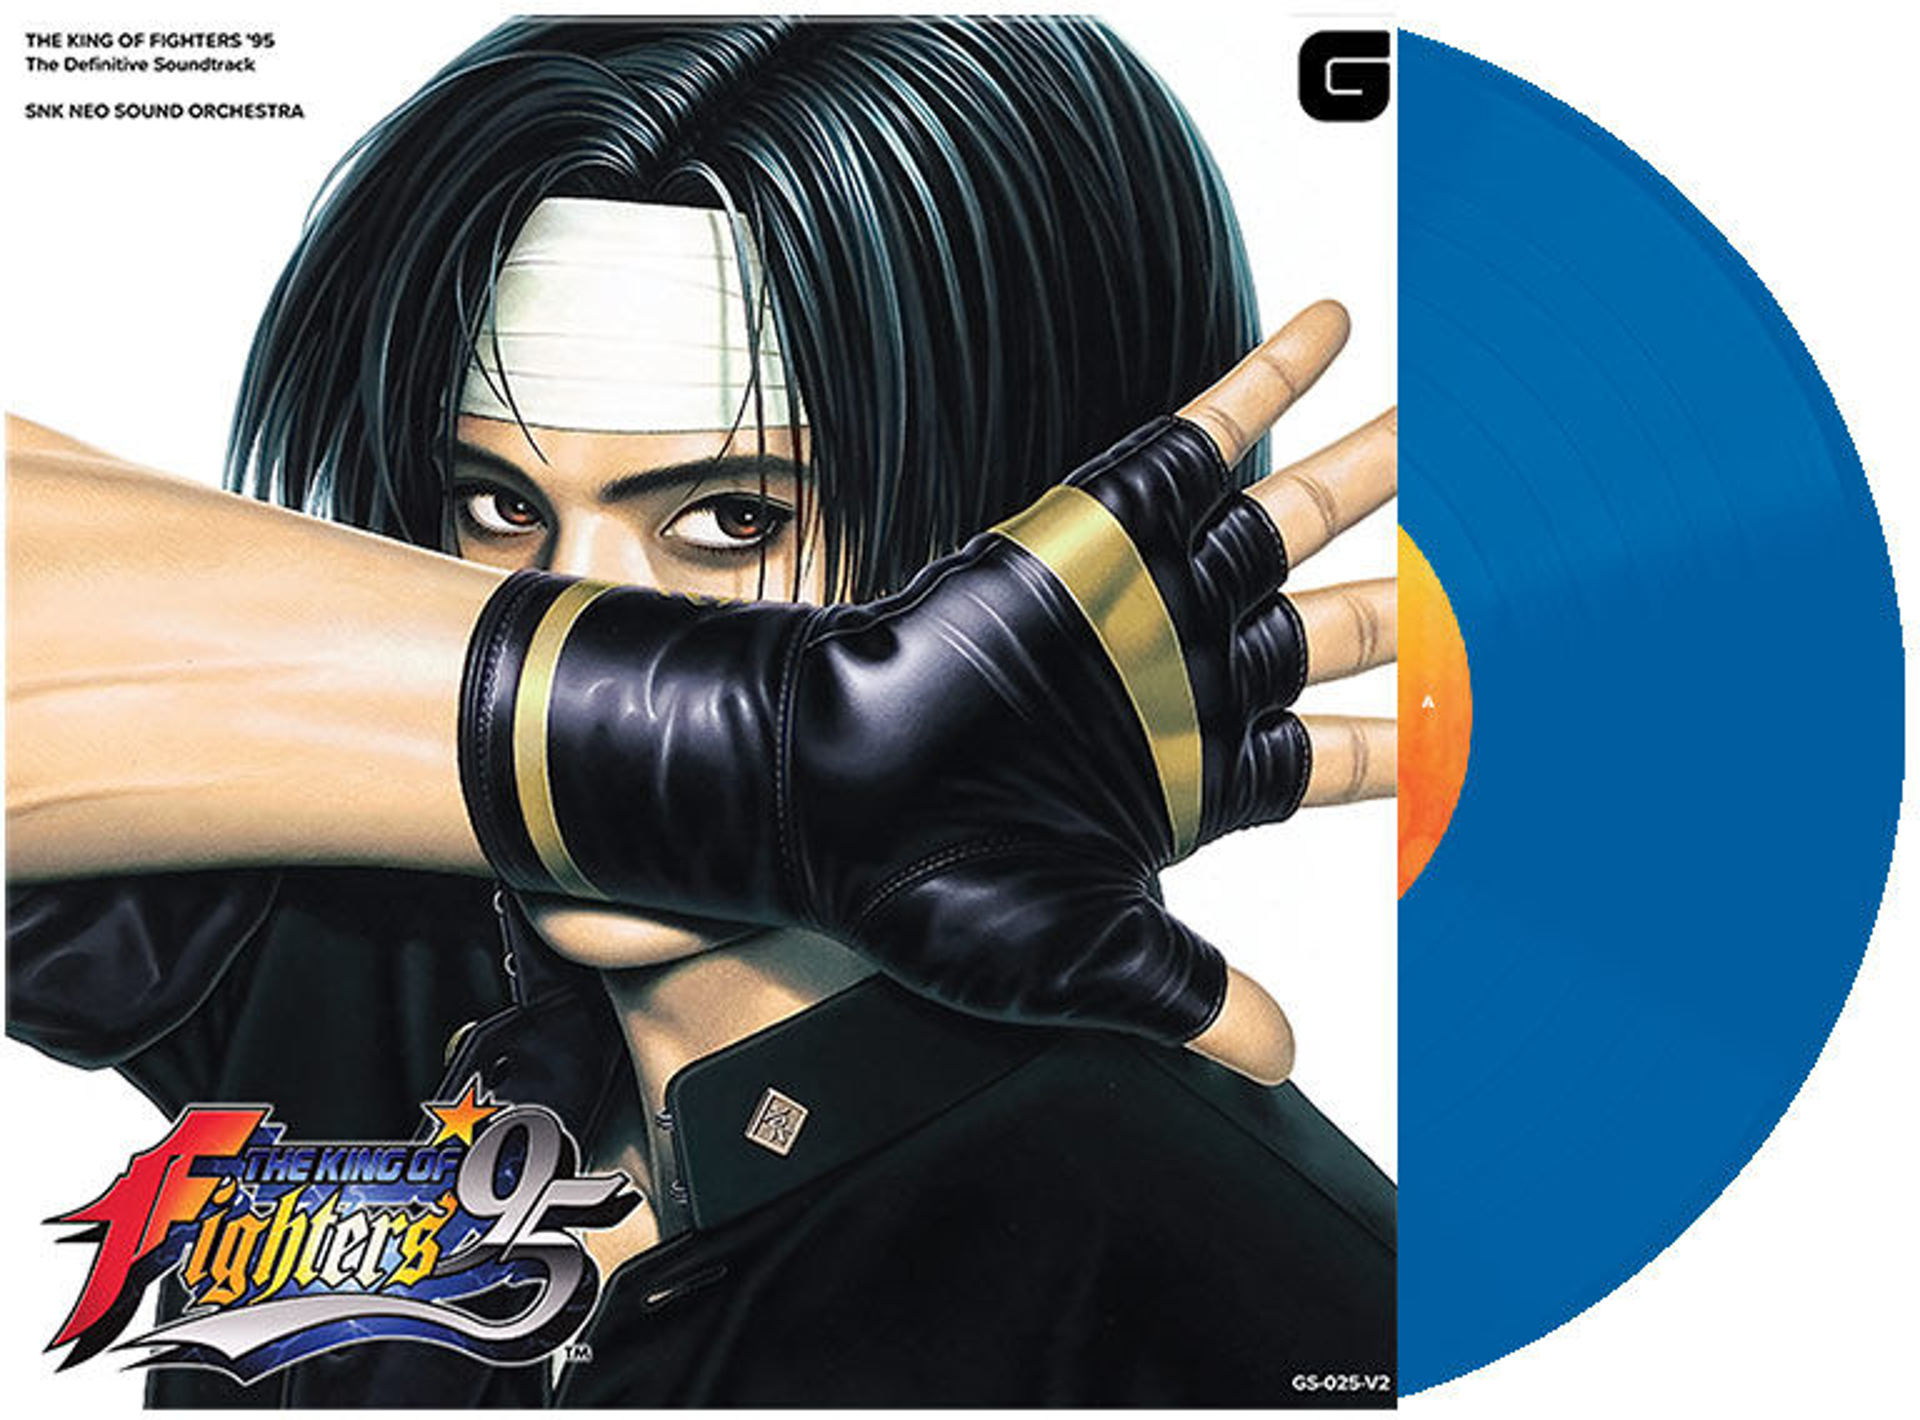 The King of Fighters '95 - The Definitive Soundtrack - 1-LP Blue Vinyl